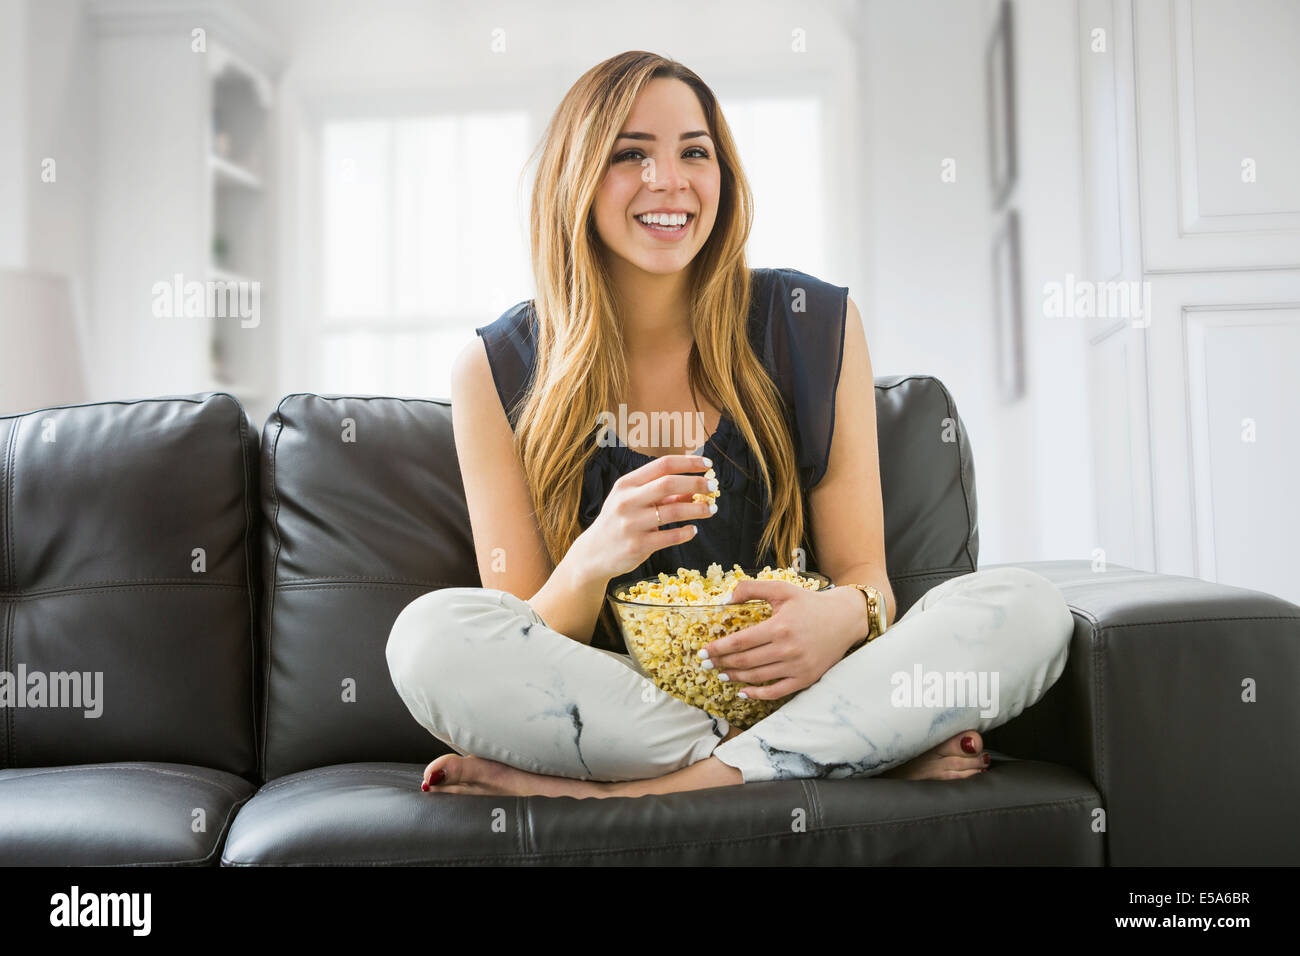 Mixed race woman watching television on sofa Stock Photo